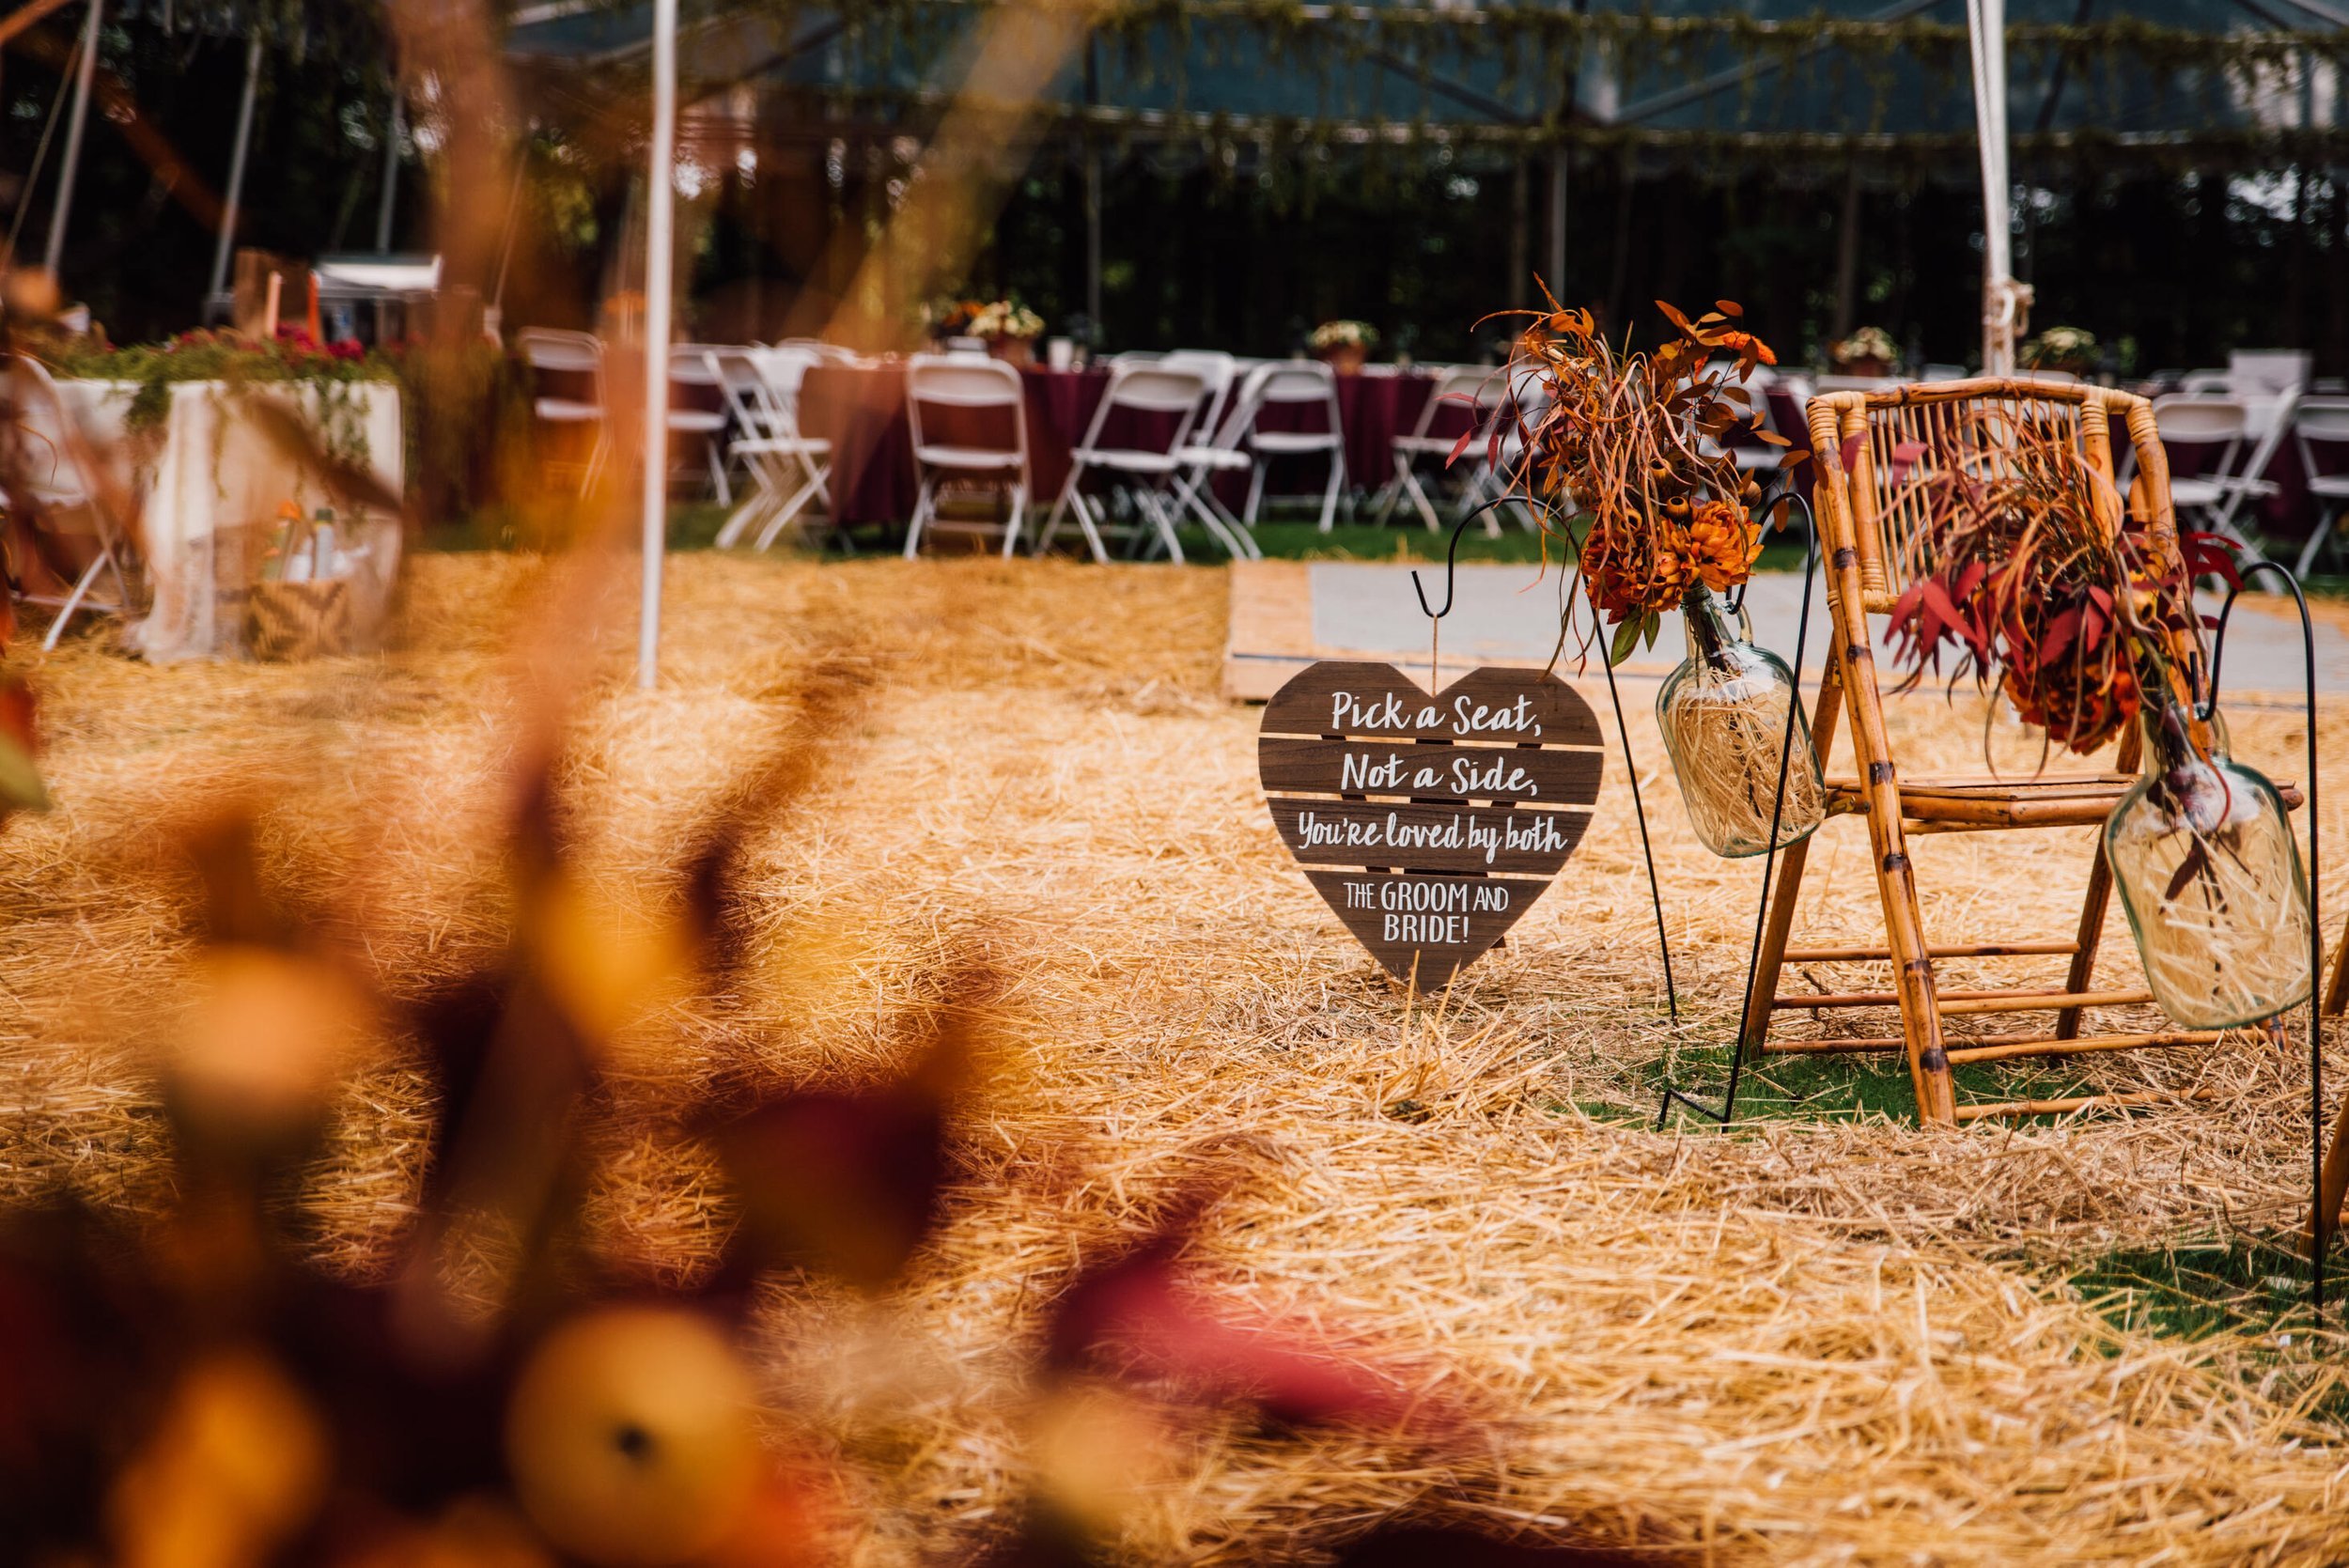  A wood sign that says “Pick a seat, not a side. You are loved by both the groom and bride.” Sits next to a rattan folding chair at an outdoor fall wedding 